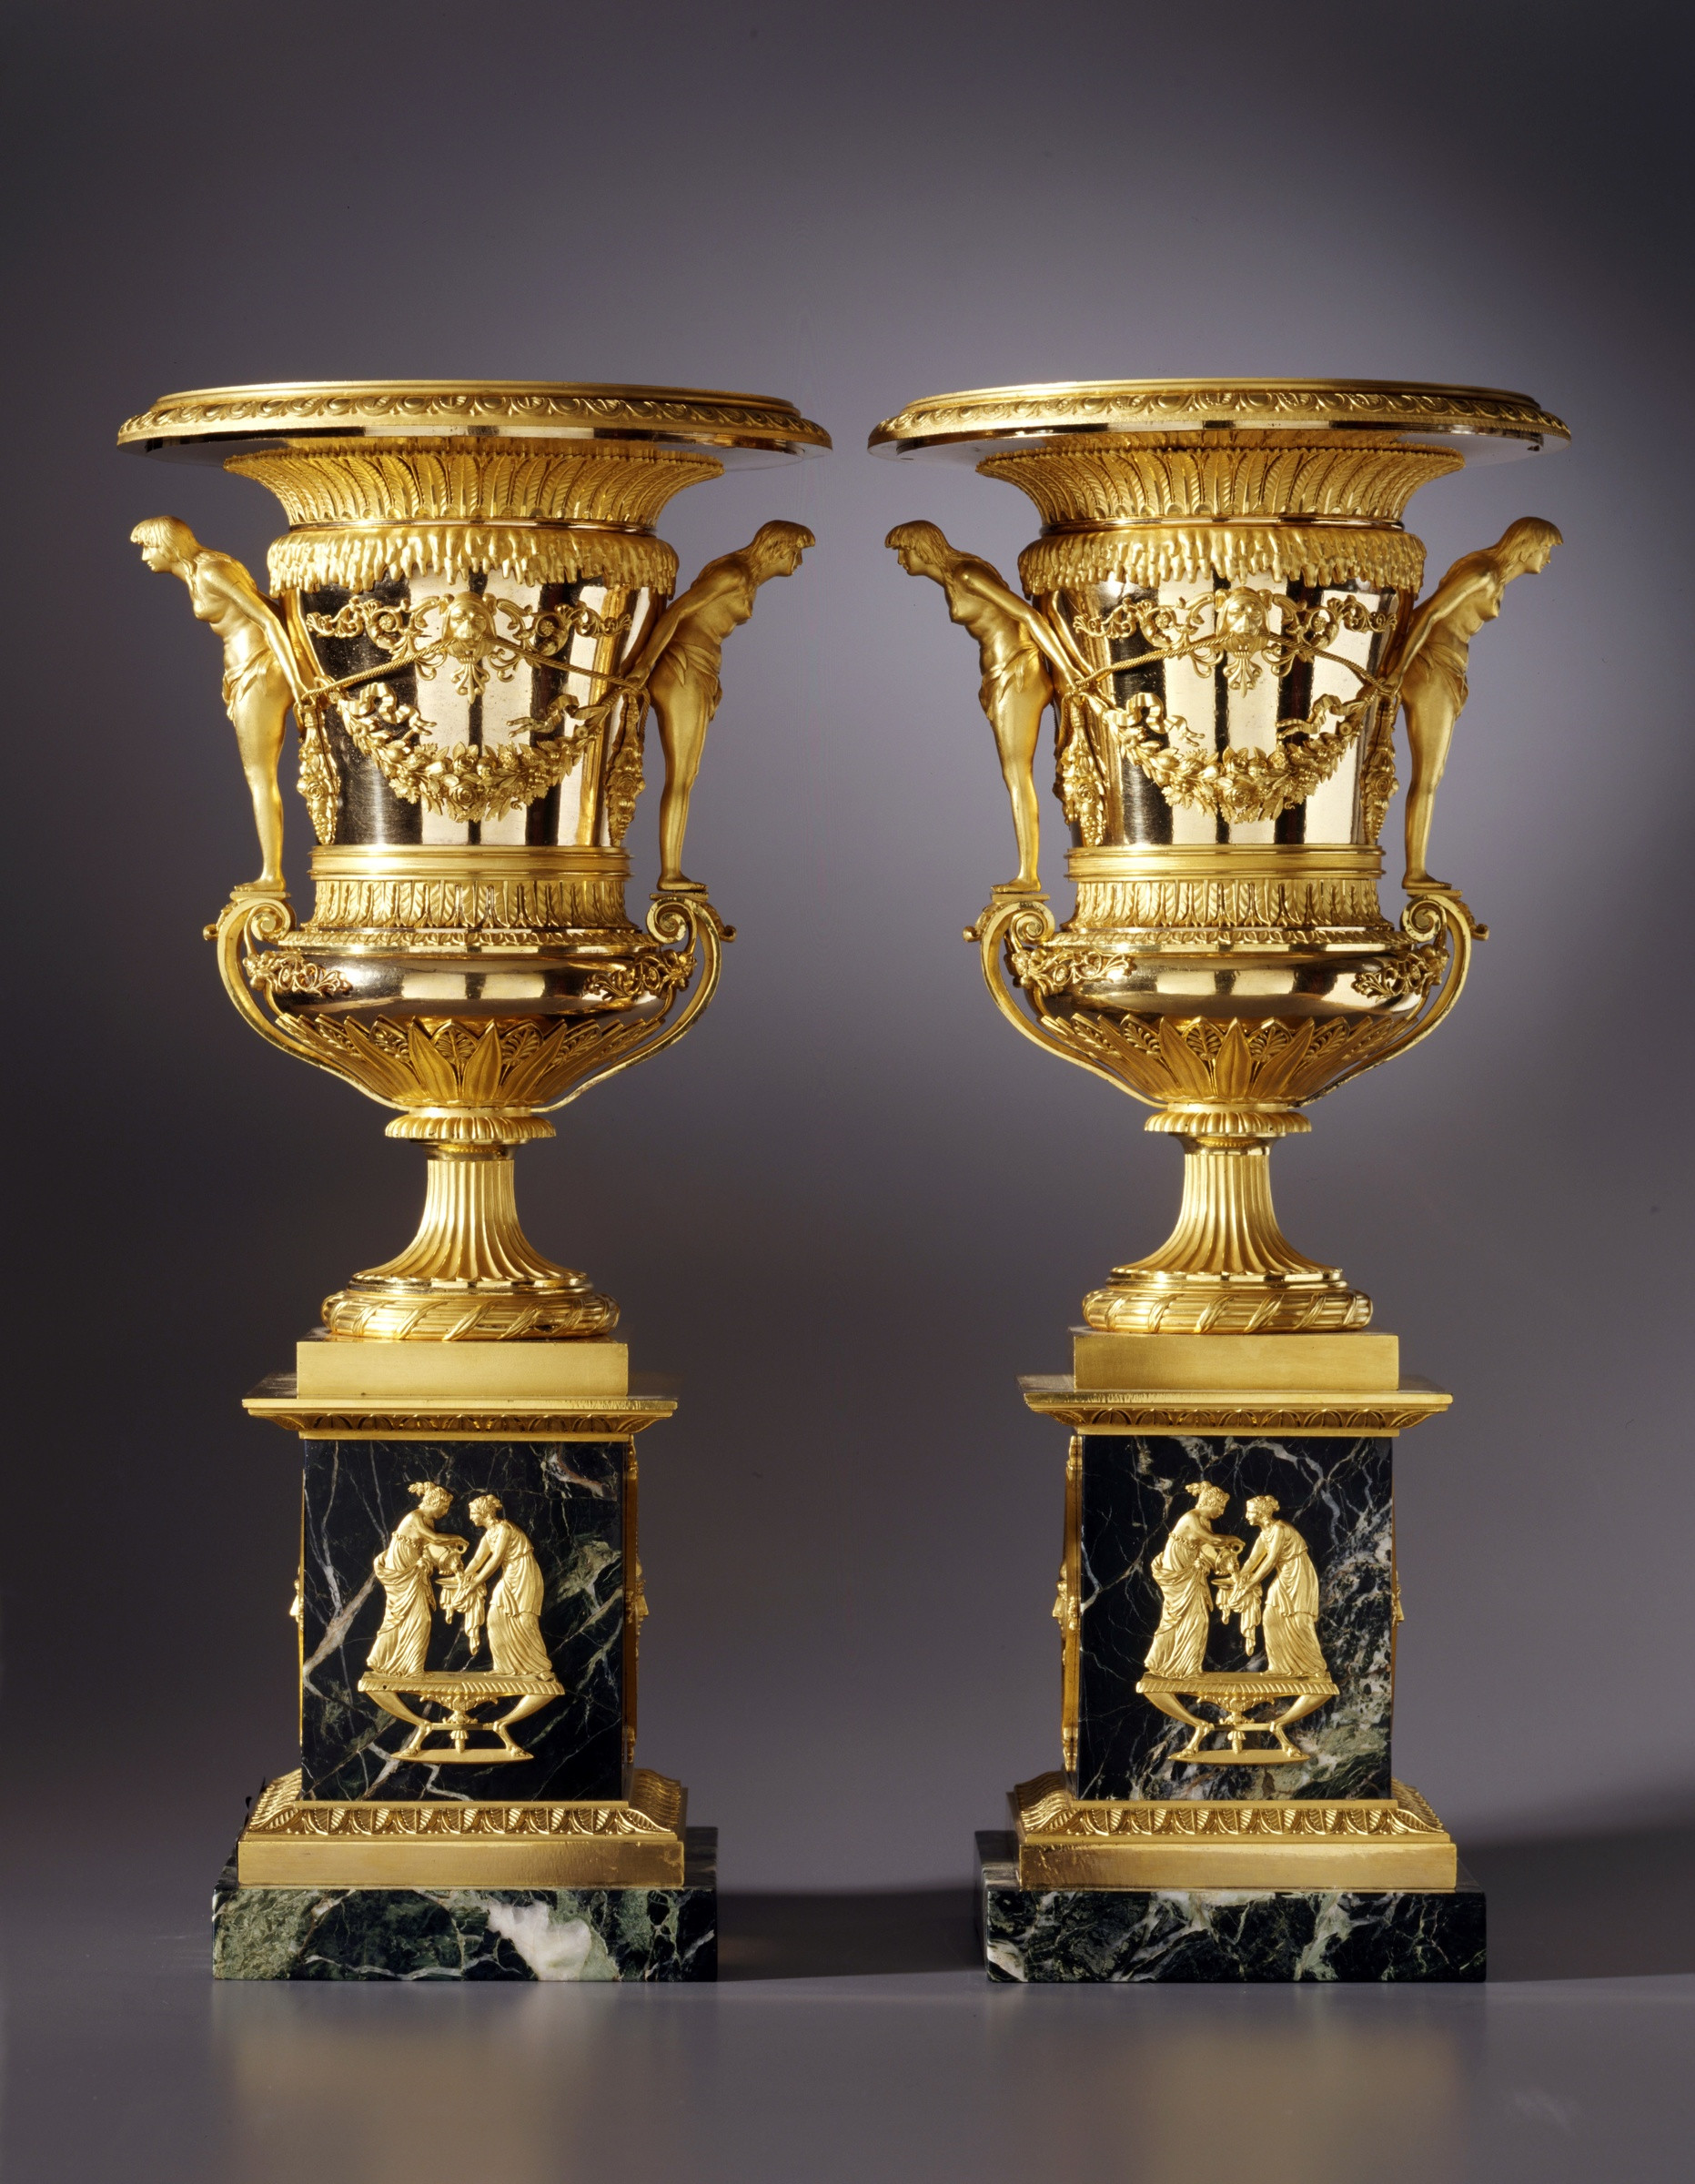 26 Best Flute Vases for Sale 2024 free download flute vases for sale of friedrich bergenfeldt attributed to a pair of large sized st for a pair of large sized st petersburg empire vases attributed to friedrich bergenfeldt